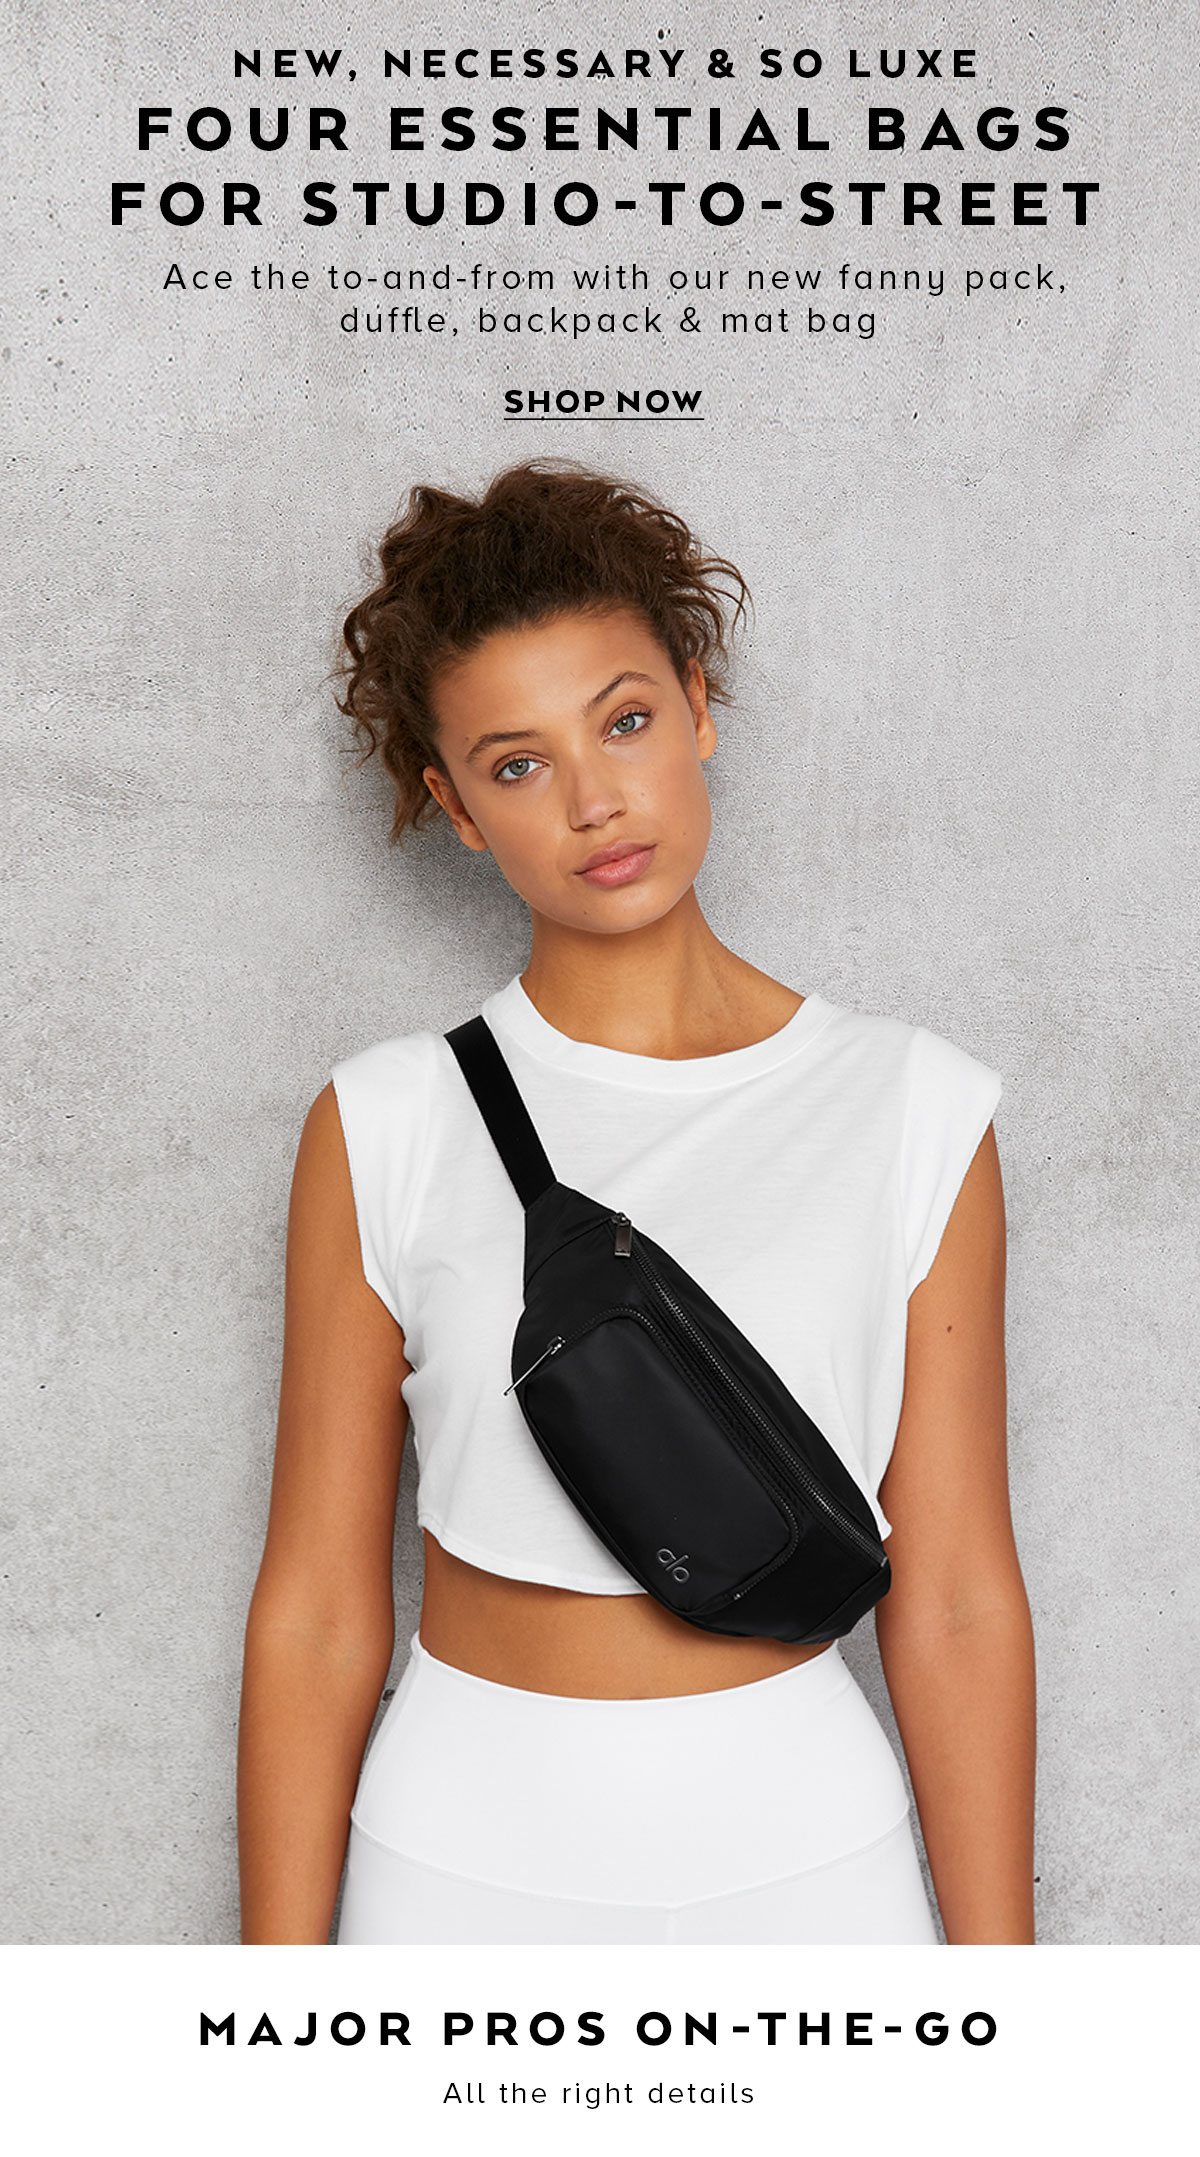 Epic News! 4 Necessary Bags to Elevate Your To-and-From - Alo Yoga